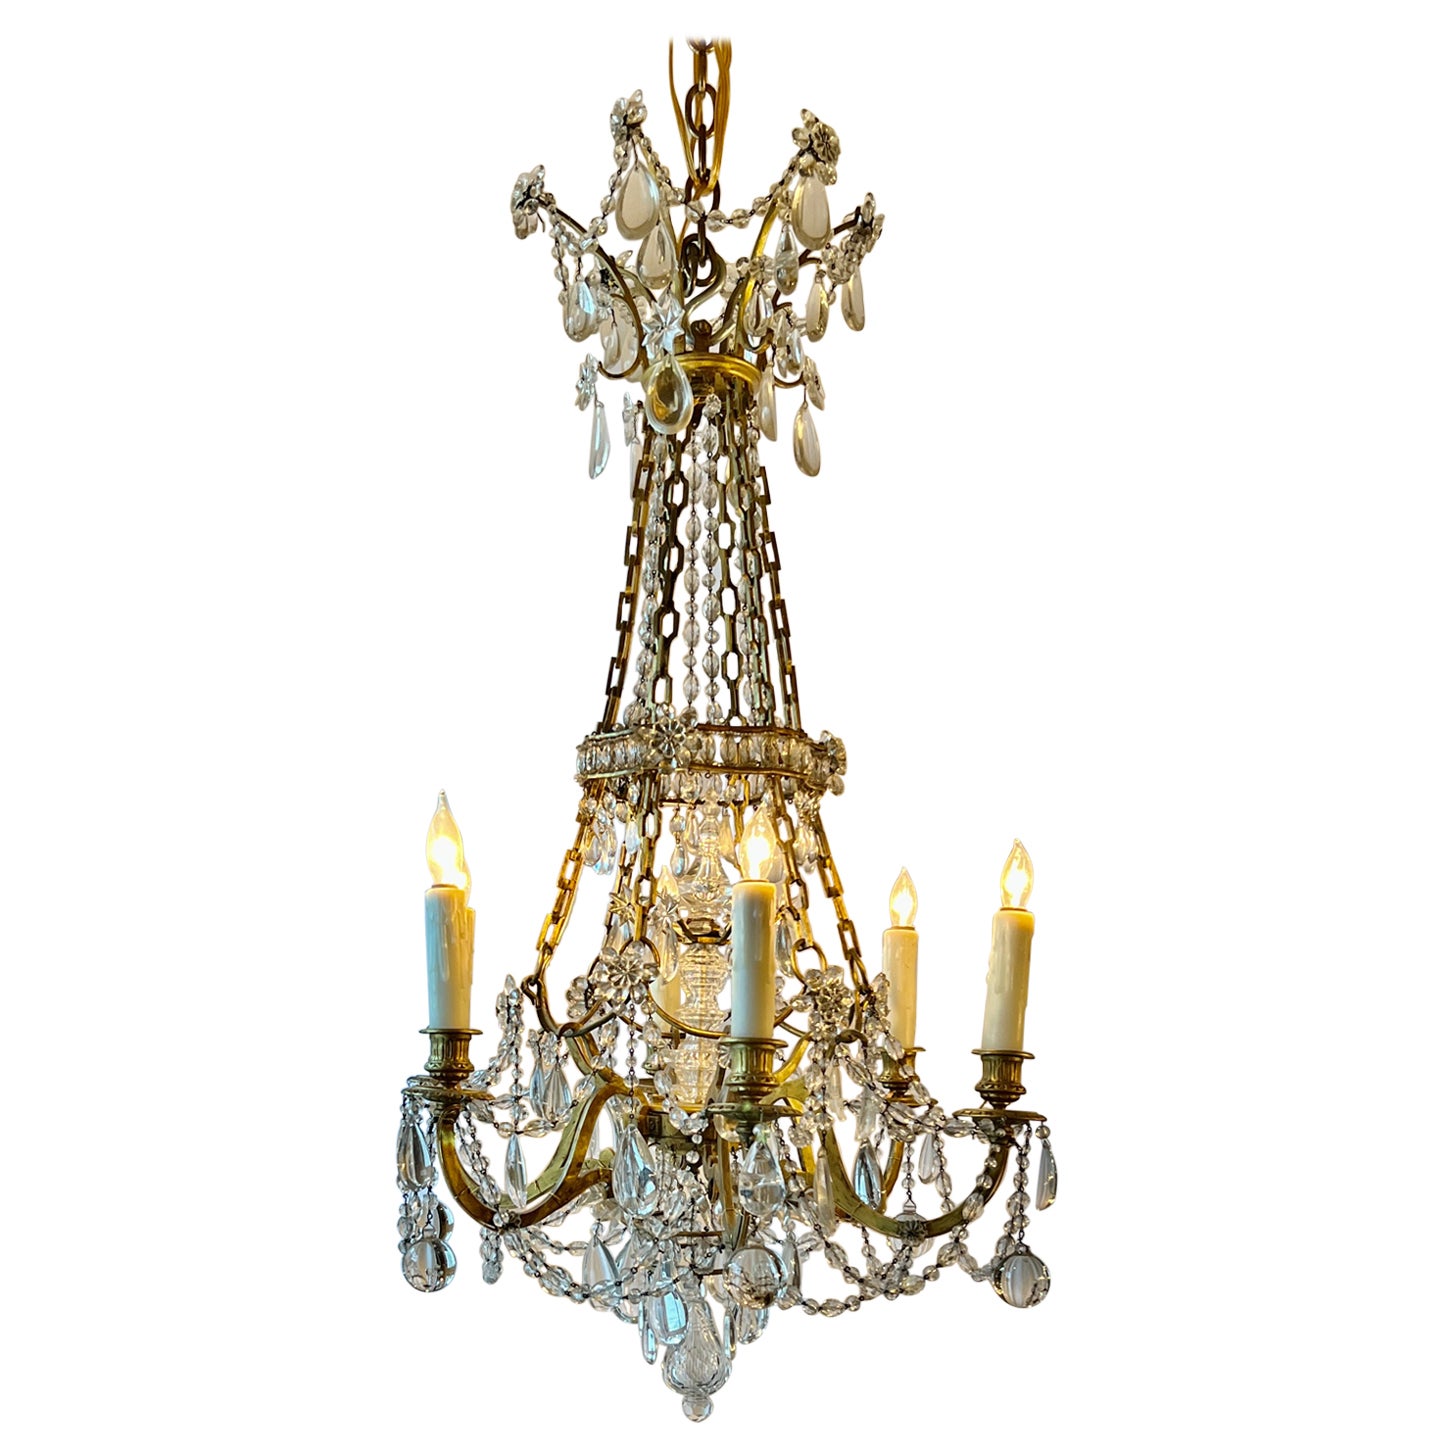 Antique French Gold Bronze and Baccarat Crystal 6 Light Chandelier, Circa 1900. For Sale